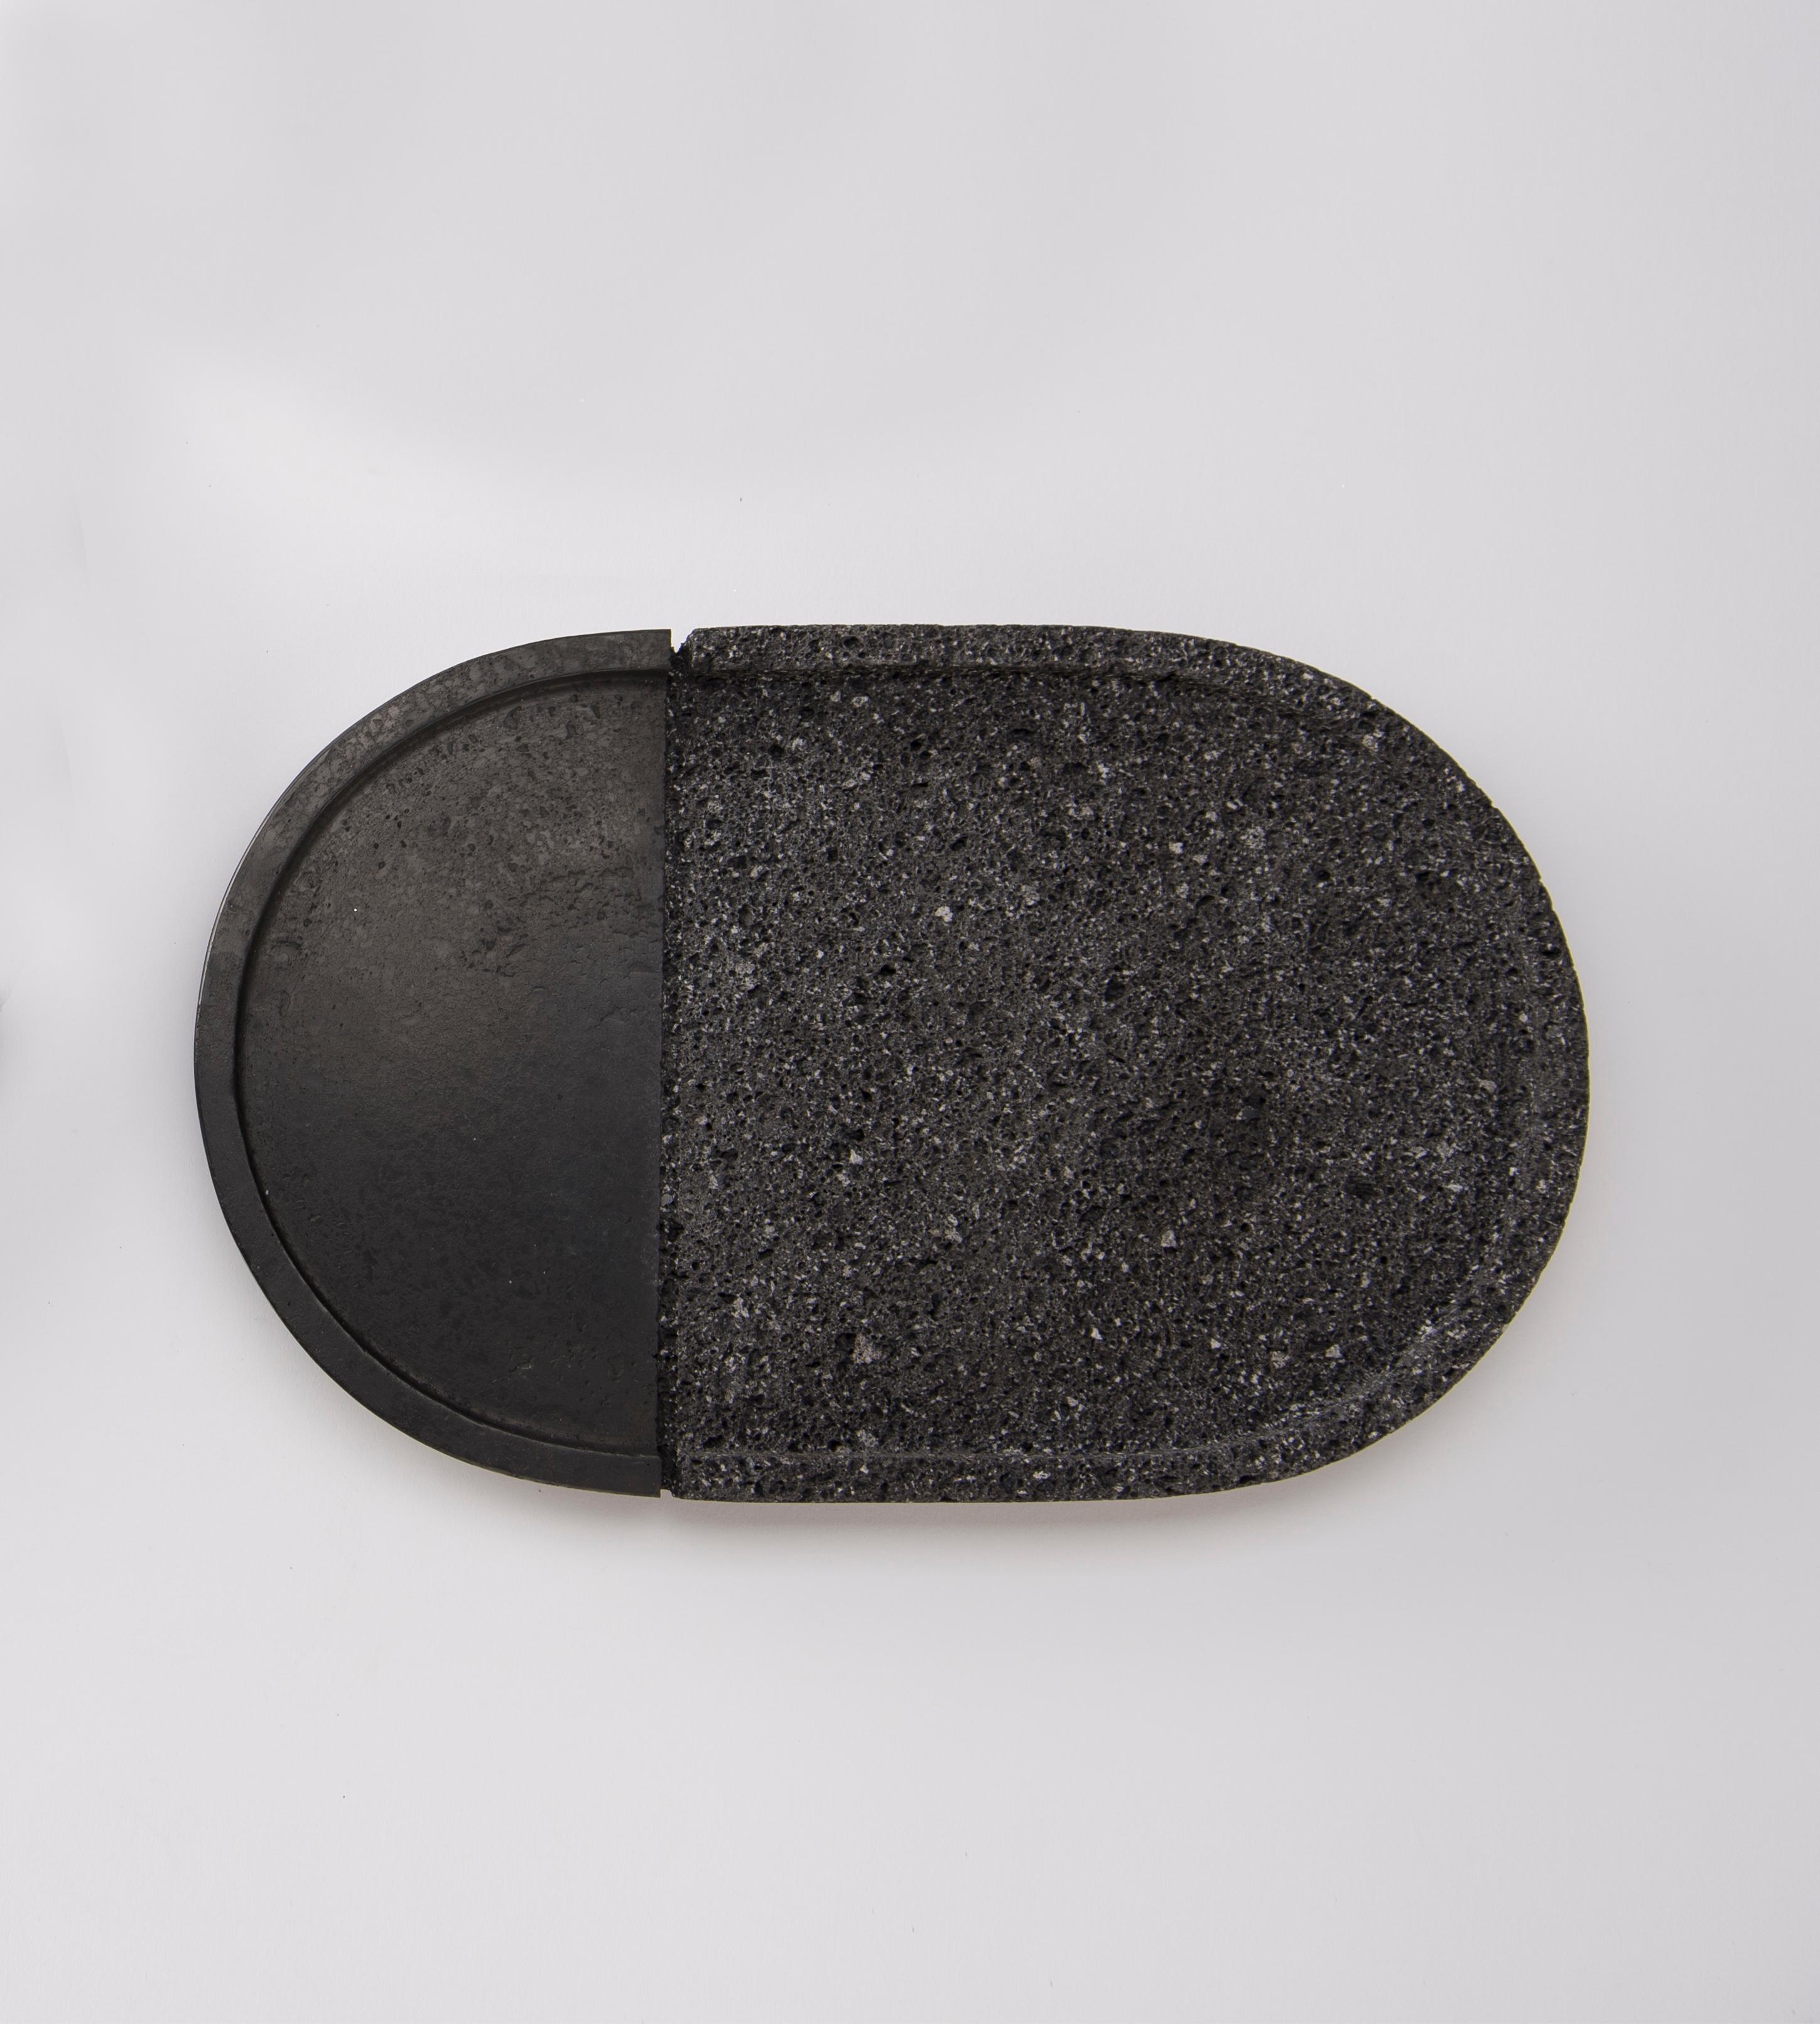 Volcanic stone is a witness to the power of nature: hand-polished by craftsmen with a millenary tradition, its unruly nature is transformed into a sensible and human object. With their Dual texture, the collection of lava plates is as much an homage